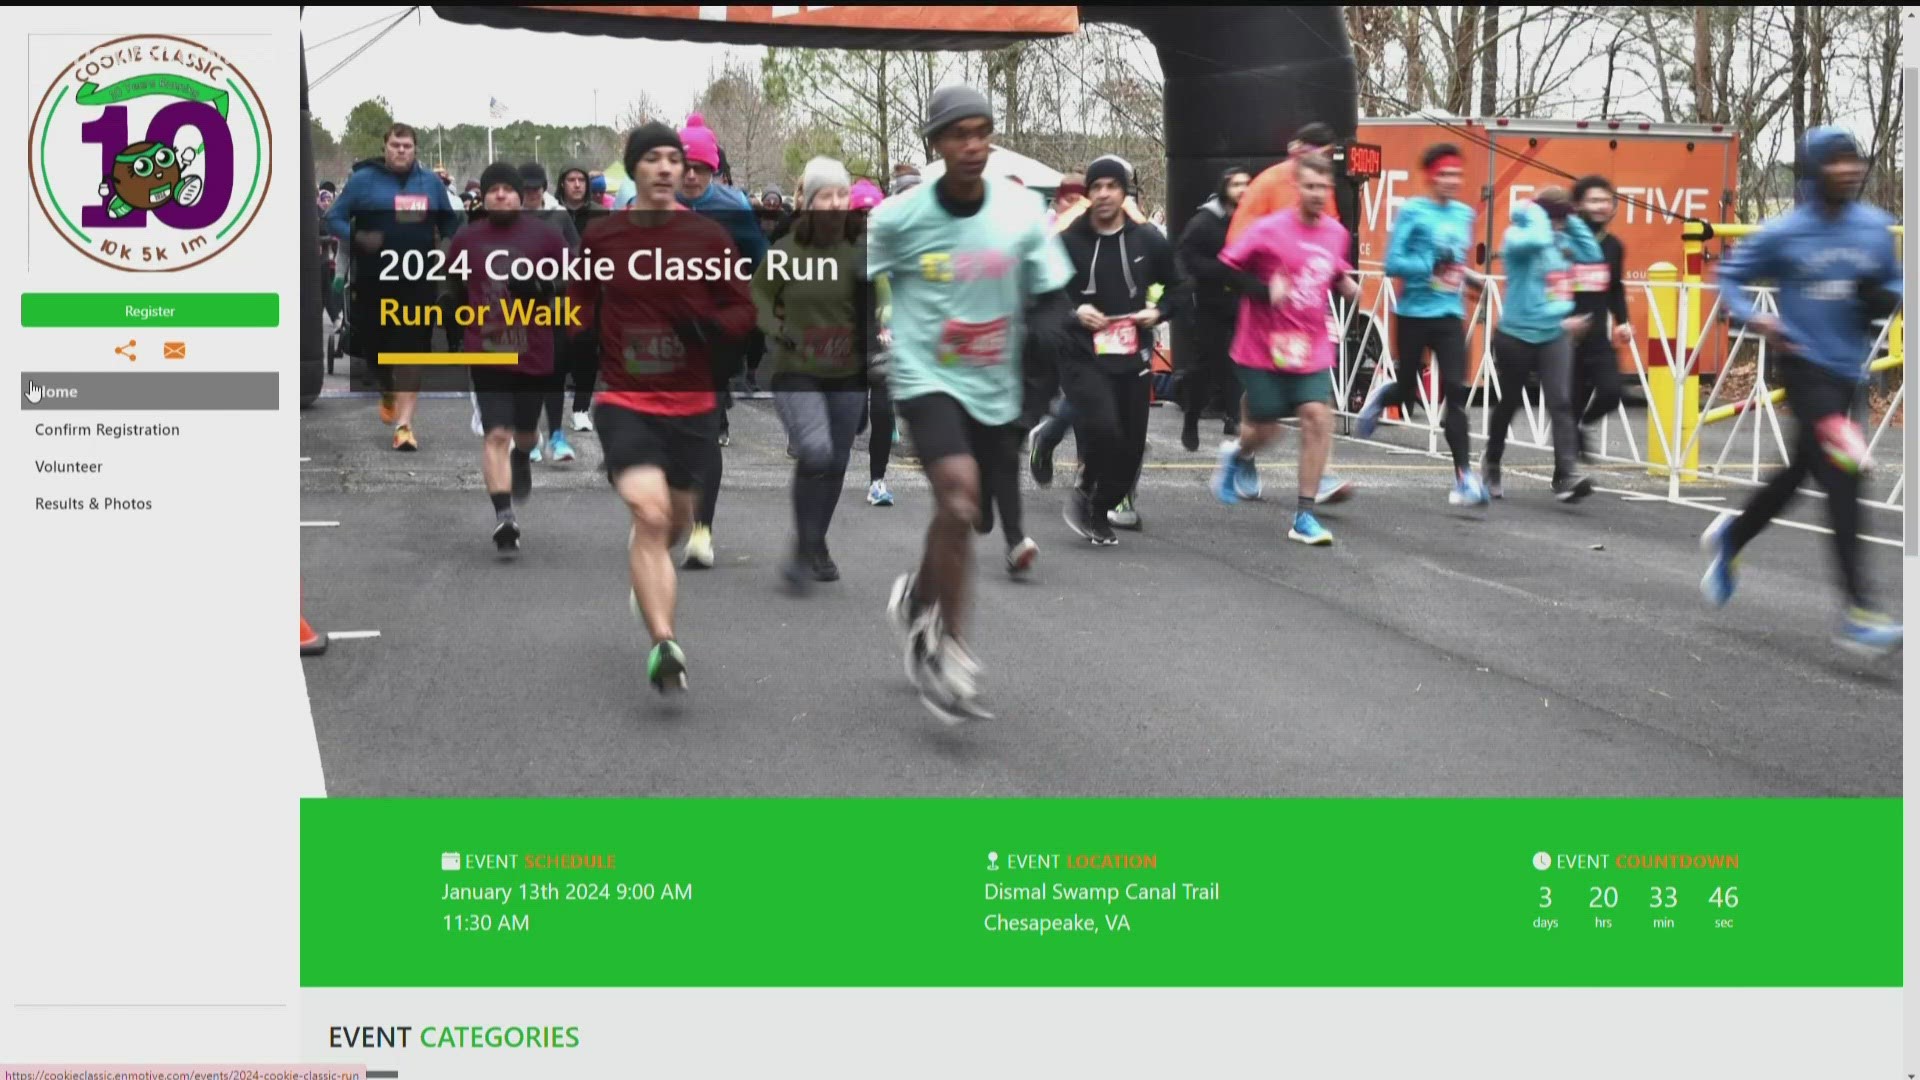 Colonial Coast Girl Scout Council is hosting its 10th annual Cookie Classic Run this Saturday to launch their cookie season.